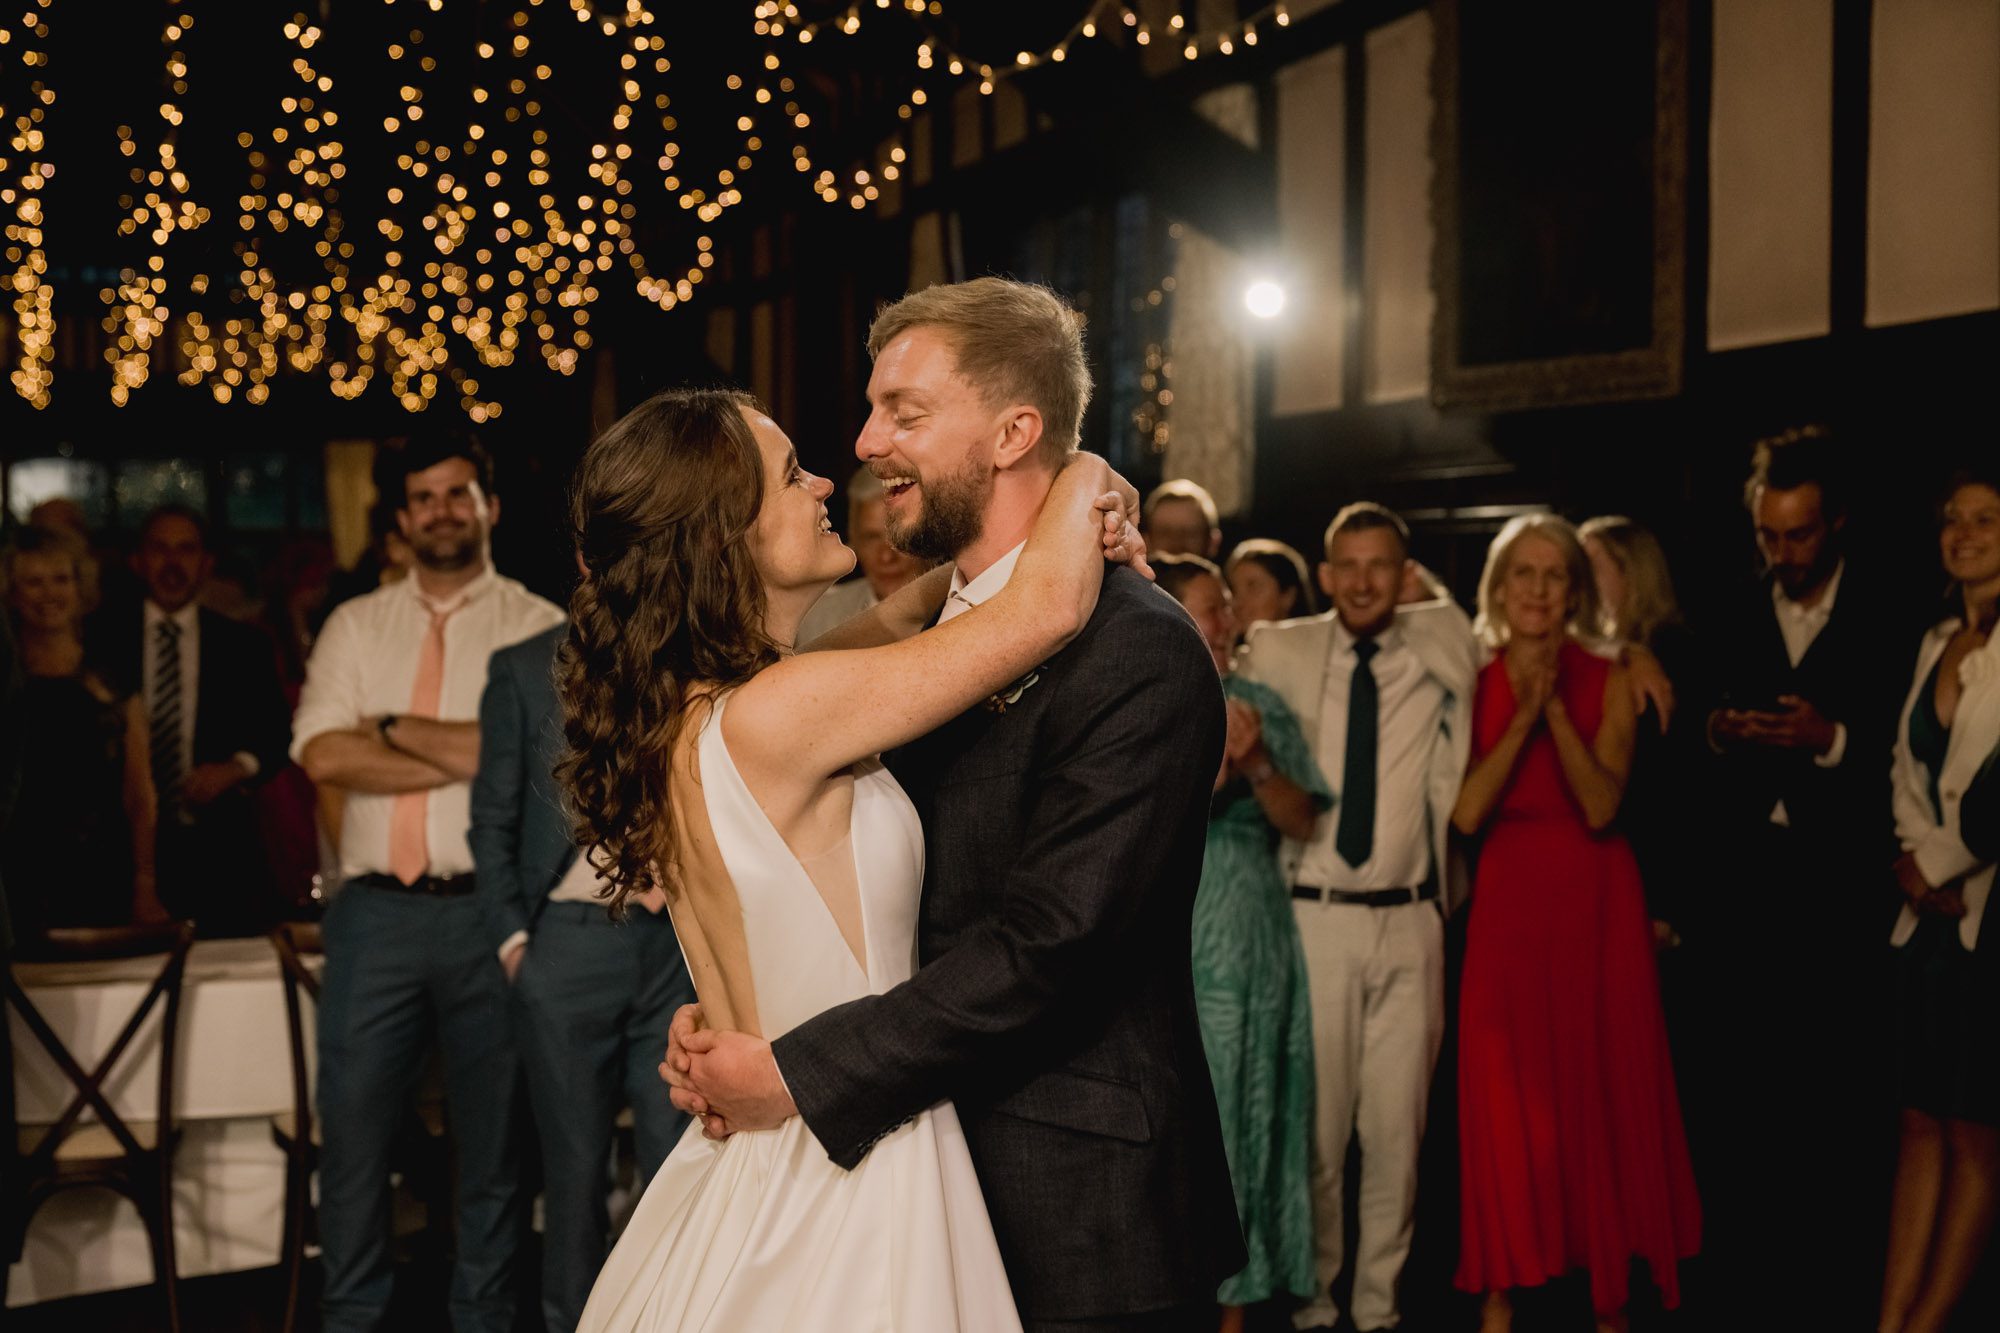 Bride and groom have their first dance together on their wedding day at Ramster Hall.